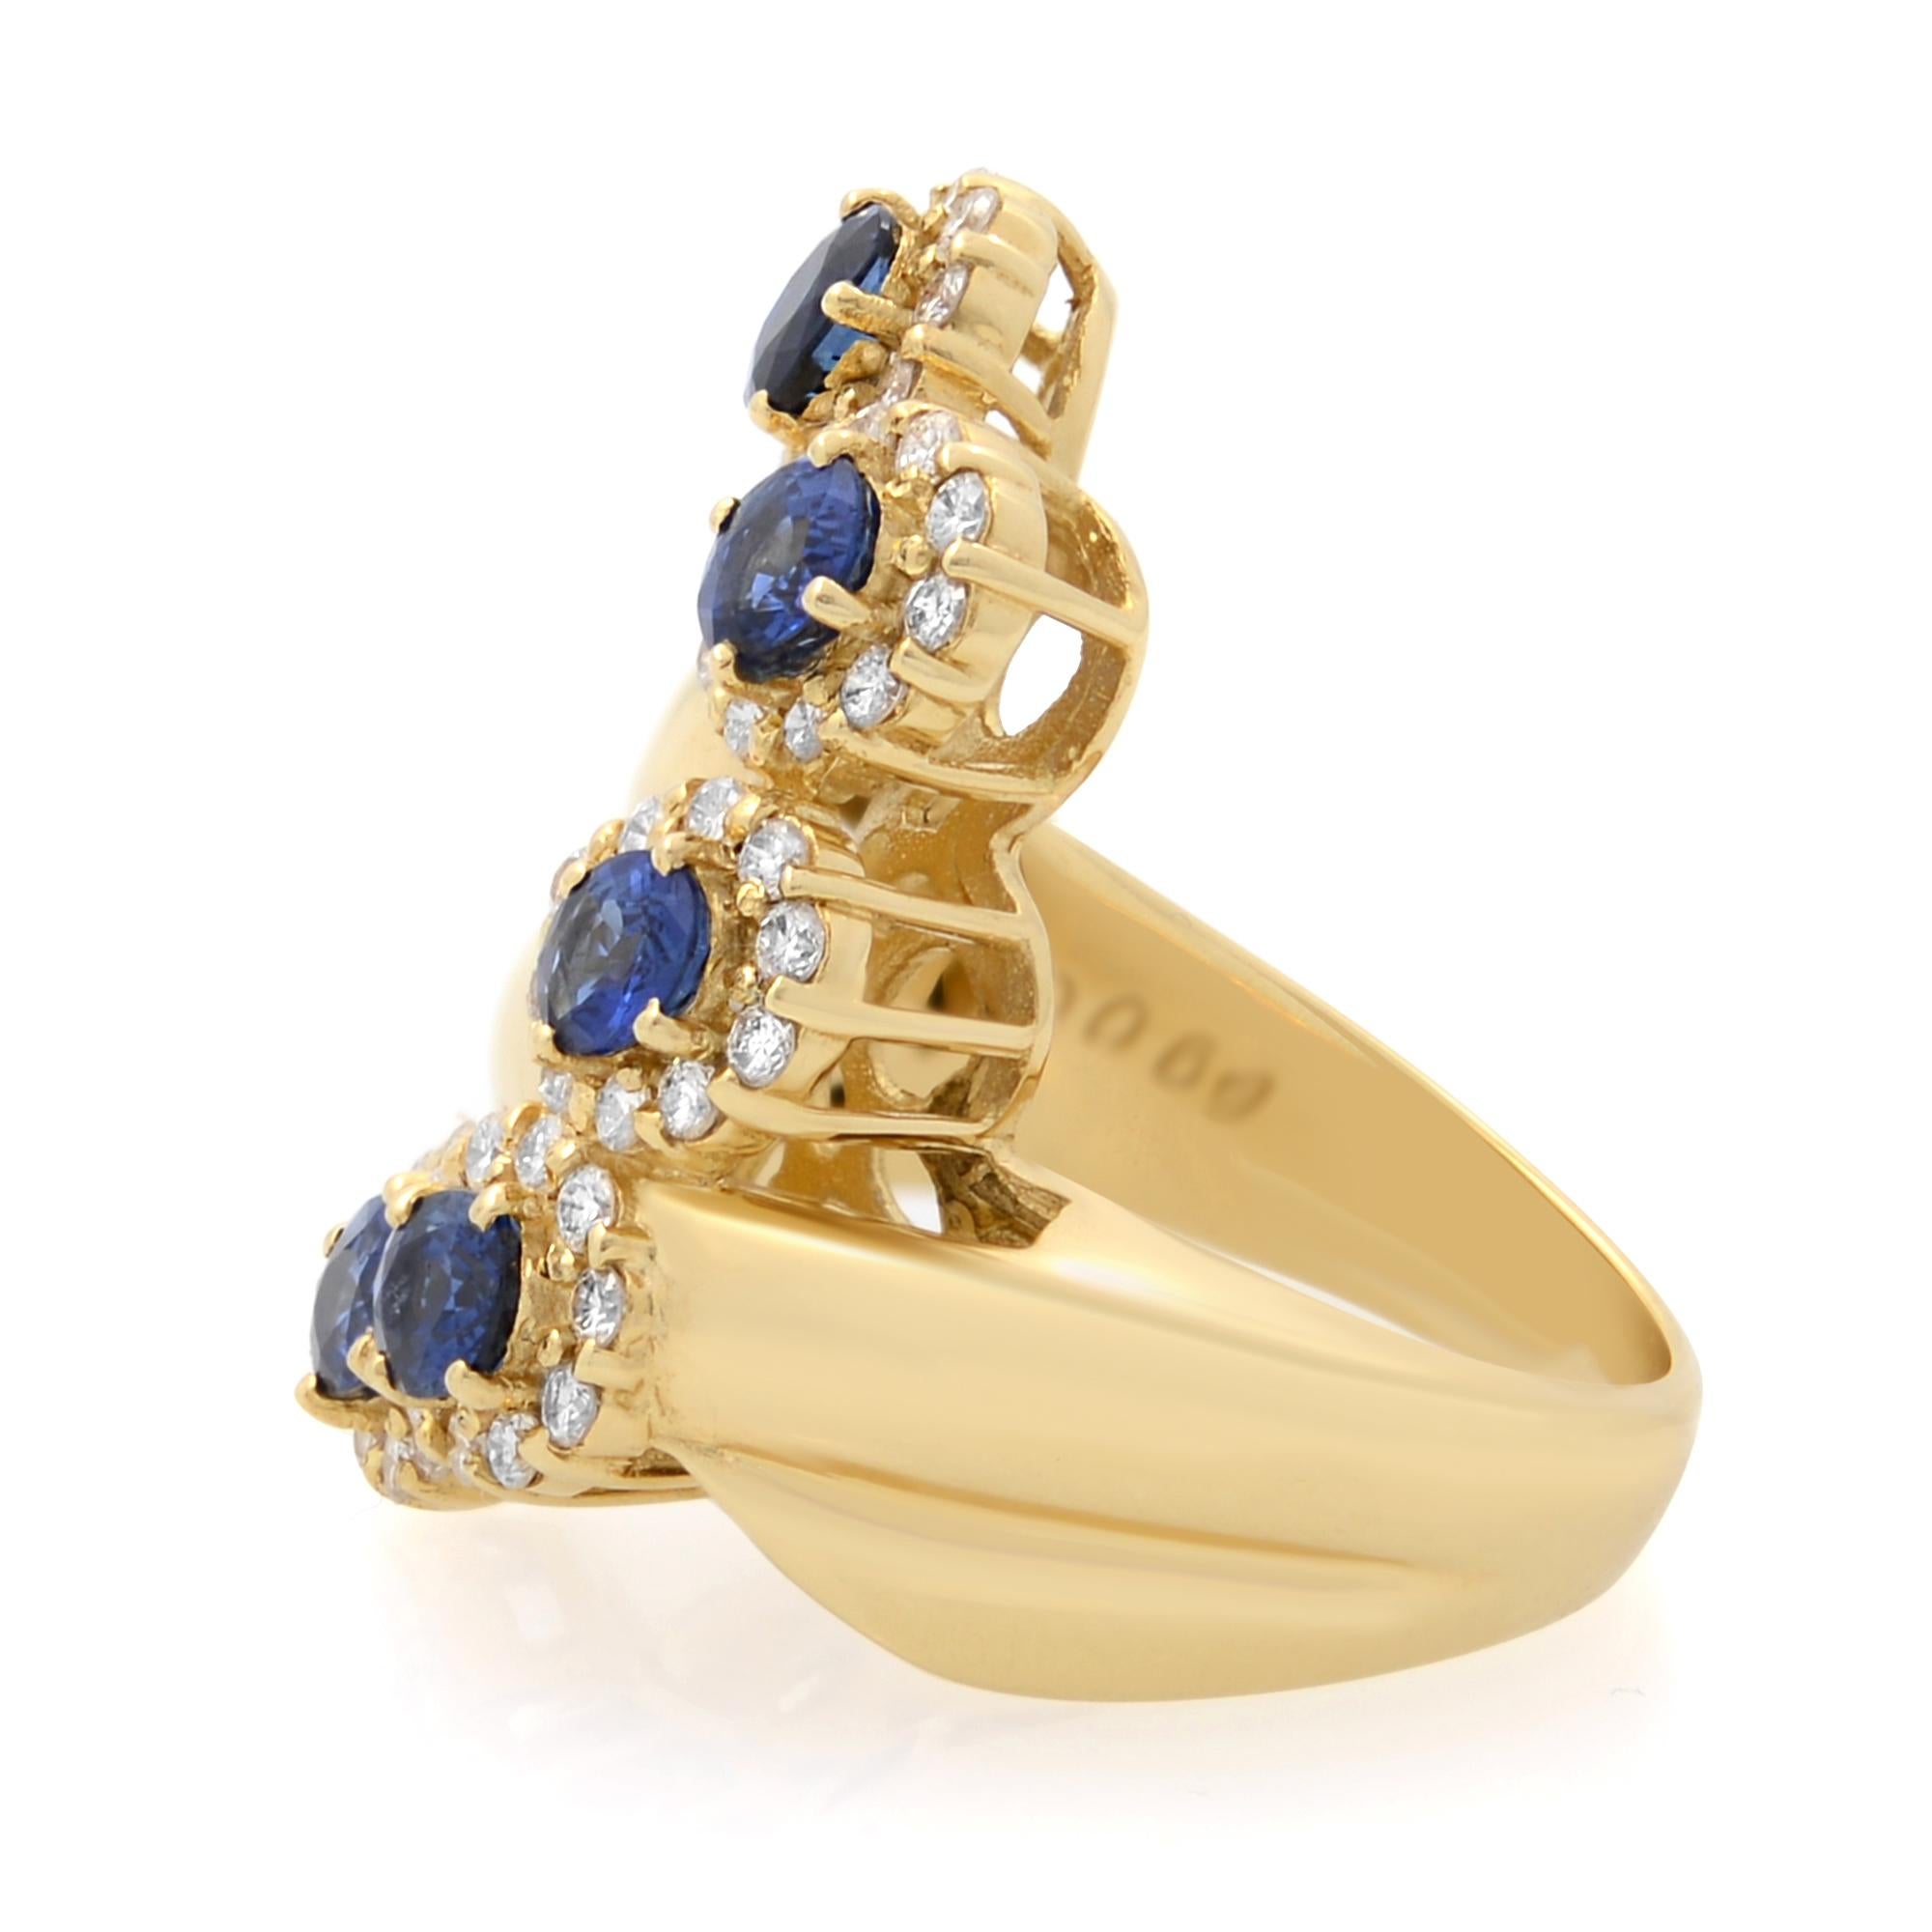 This stunning cocktail ring comes with a flashy statement look. A must have in your jewelry collection. The ring is crafted in 18K yellow gold. Featuring oval cut blue Sapphires weighing 1.89cttw surrounded with round brilliant cut diamonds weighing